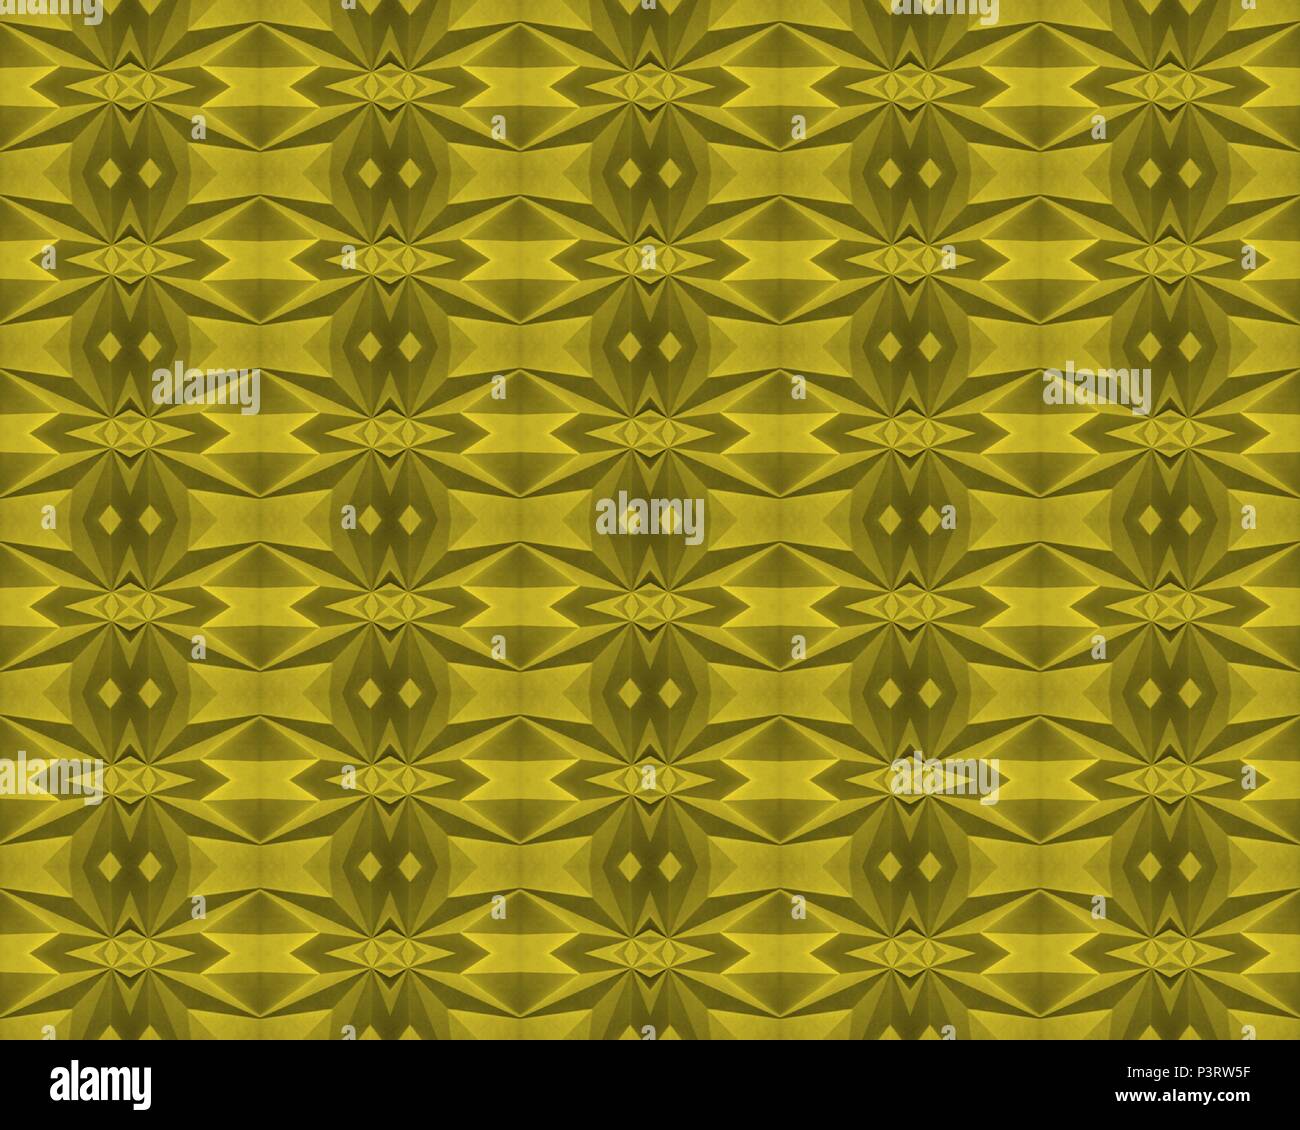 Yellow (Meadowlark; Pantone 13-0646) seamless, tile-able geometric pattern, made from a picture of origami. Stock Vector